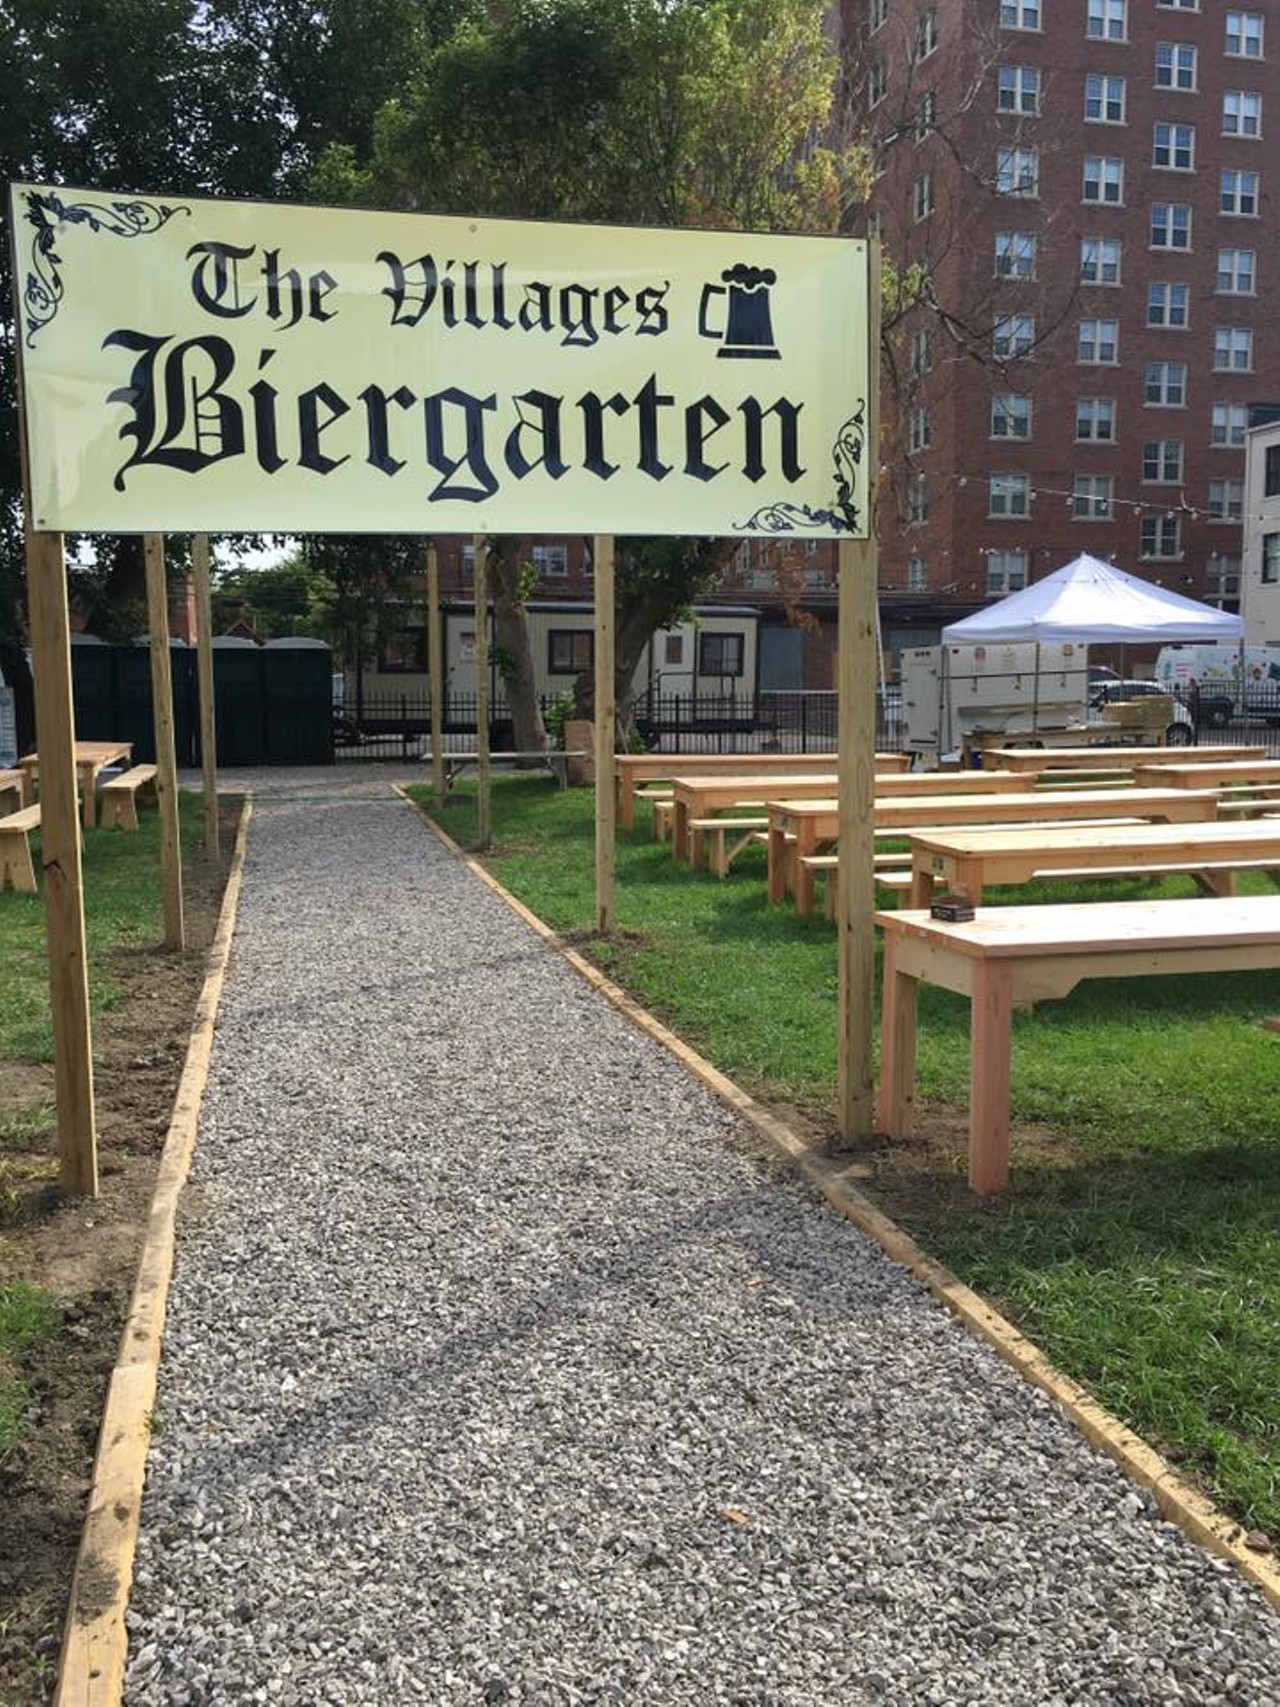 West Villages Biergarten
Perhaps you&#146;ve heard of the fall pop-up biergarten in West Village? It&#146;s called the Villages Biergarten, and it takes over the neighborhood &#147;Bark Park&#148; and transforms it into a family-friendly Biergarten on weekends into November. Visitors can expect a variety of world-class beers and wines, all at modest prices. Non-alcoholic drinks and local food will also be available. Proceeds will benefit two local nonprofits: the Villages Community Development Corp. and the Indian Village Historical Collections. It sounds like a great way on a brisk day to do some good while having fun.
The Villages Biergarten takes place 11 a.m.-11 p.m. Saturdays and 1:30-10 p.m. Sundays until Nov. 6, at 1420 Van Dyke St., Detroit; rain or shine; for more info, see thevillagesofdetroit.com/events.